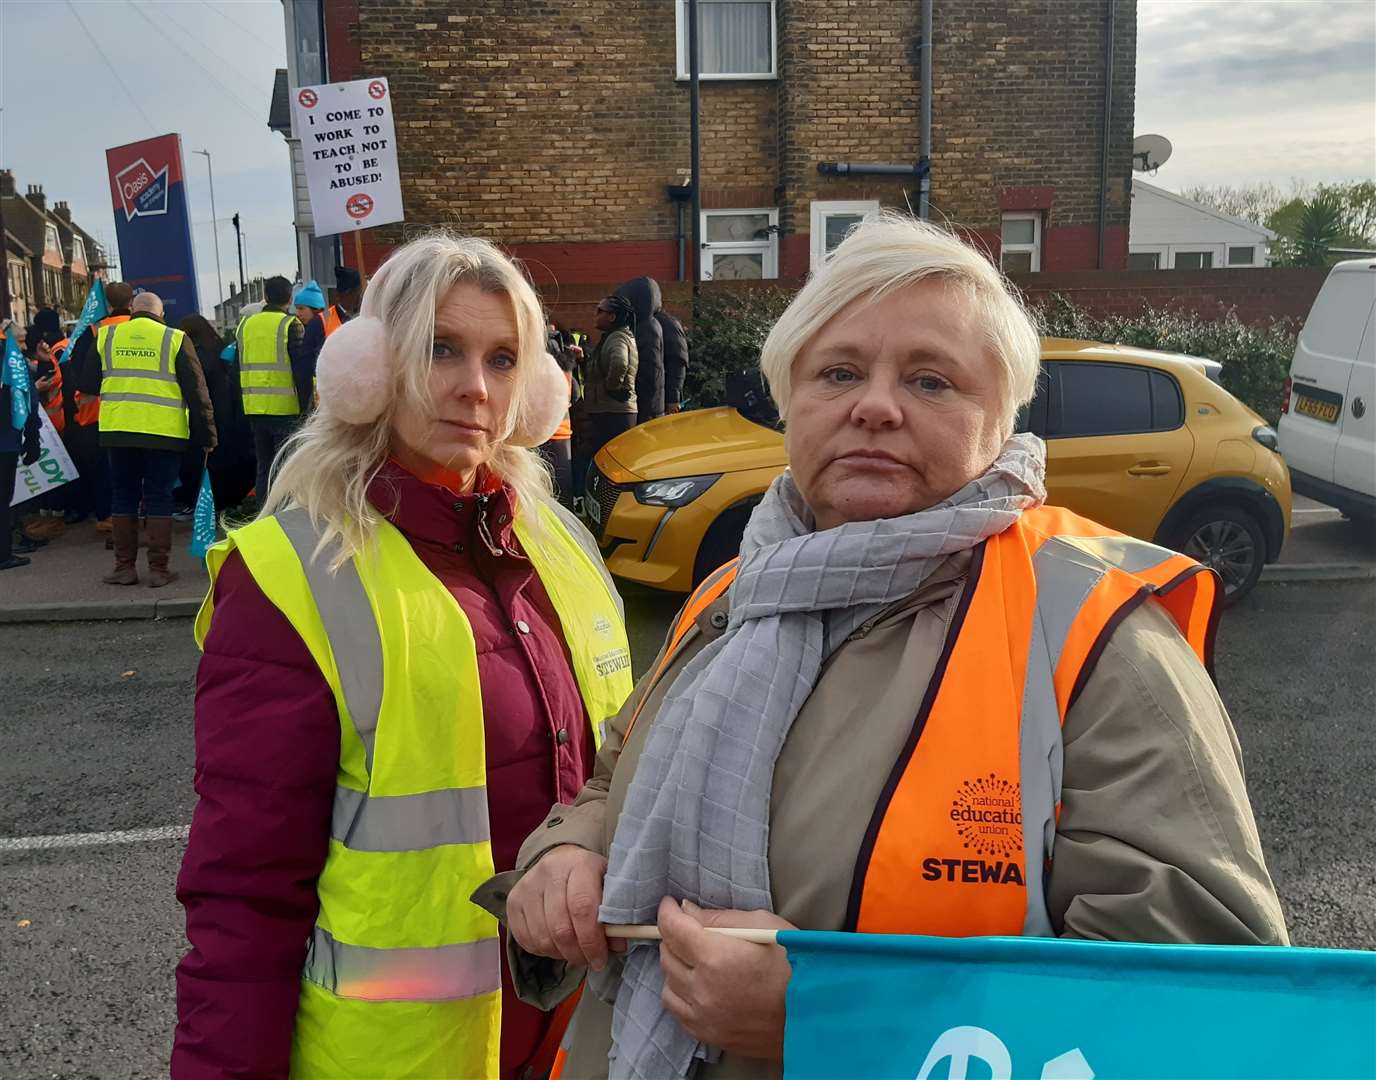 Oasis Academy teachers Claire, left, and Lisa, right, are striking in protest against violence and threats at the school